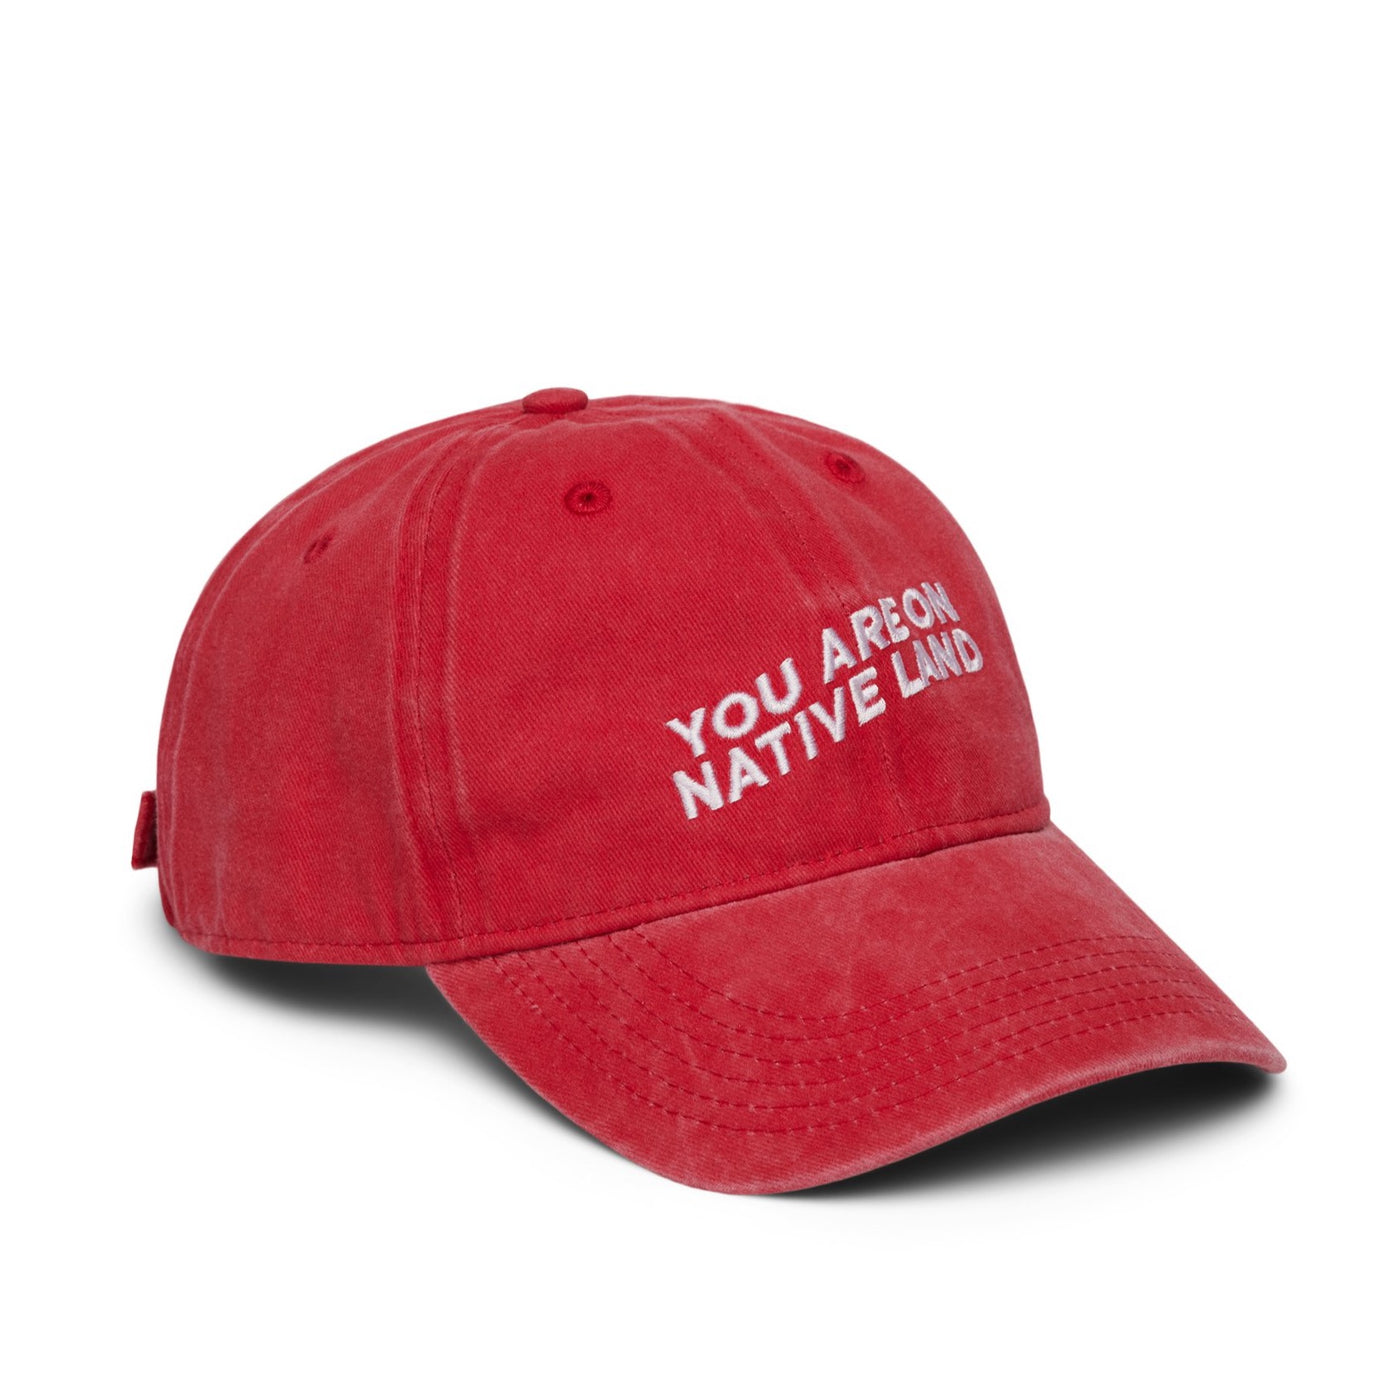 'YOU ARE ON NATIVE LAND' DAD CAP - RED